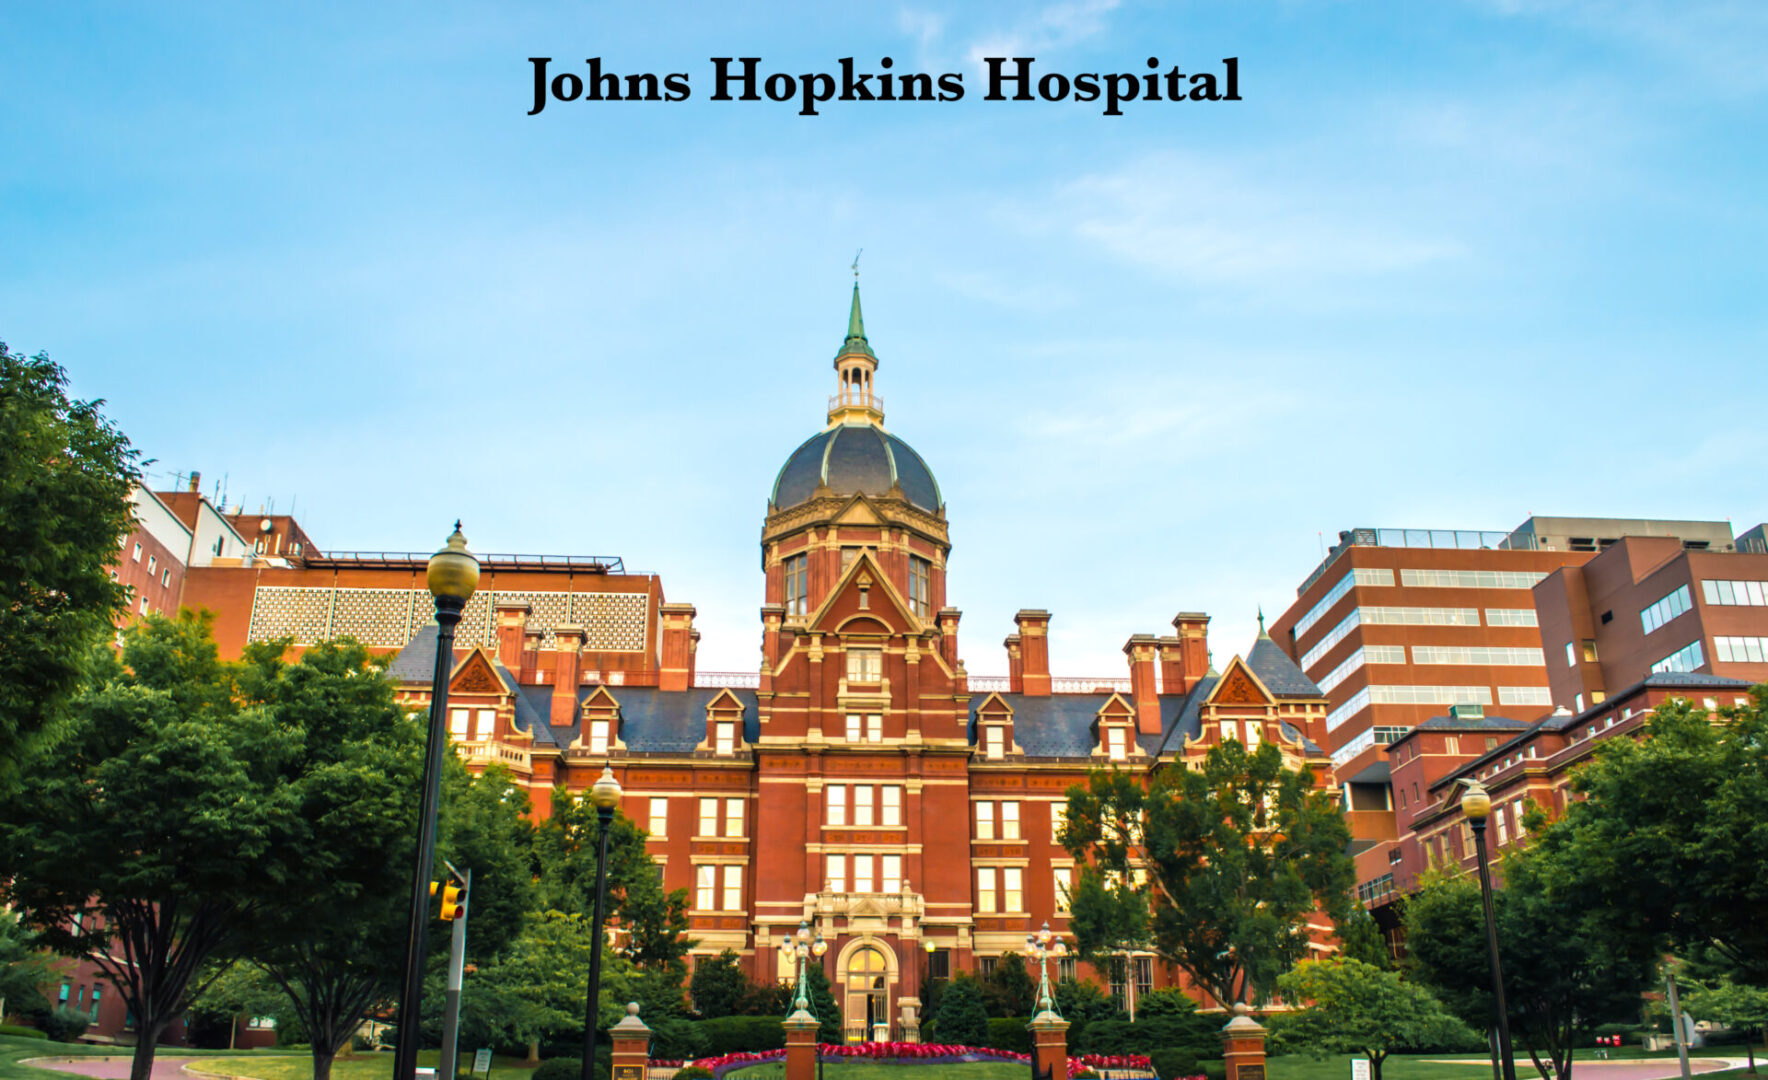 View of the Johns Hopkins University School of Medicne building in Baltimore city, Maryland.